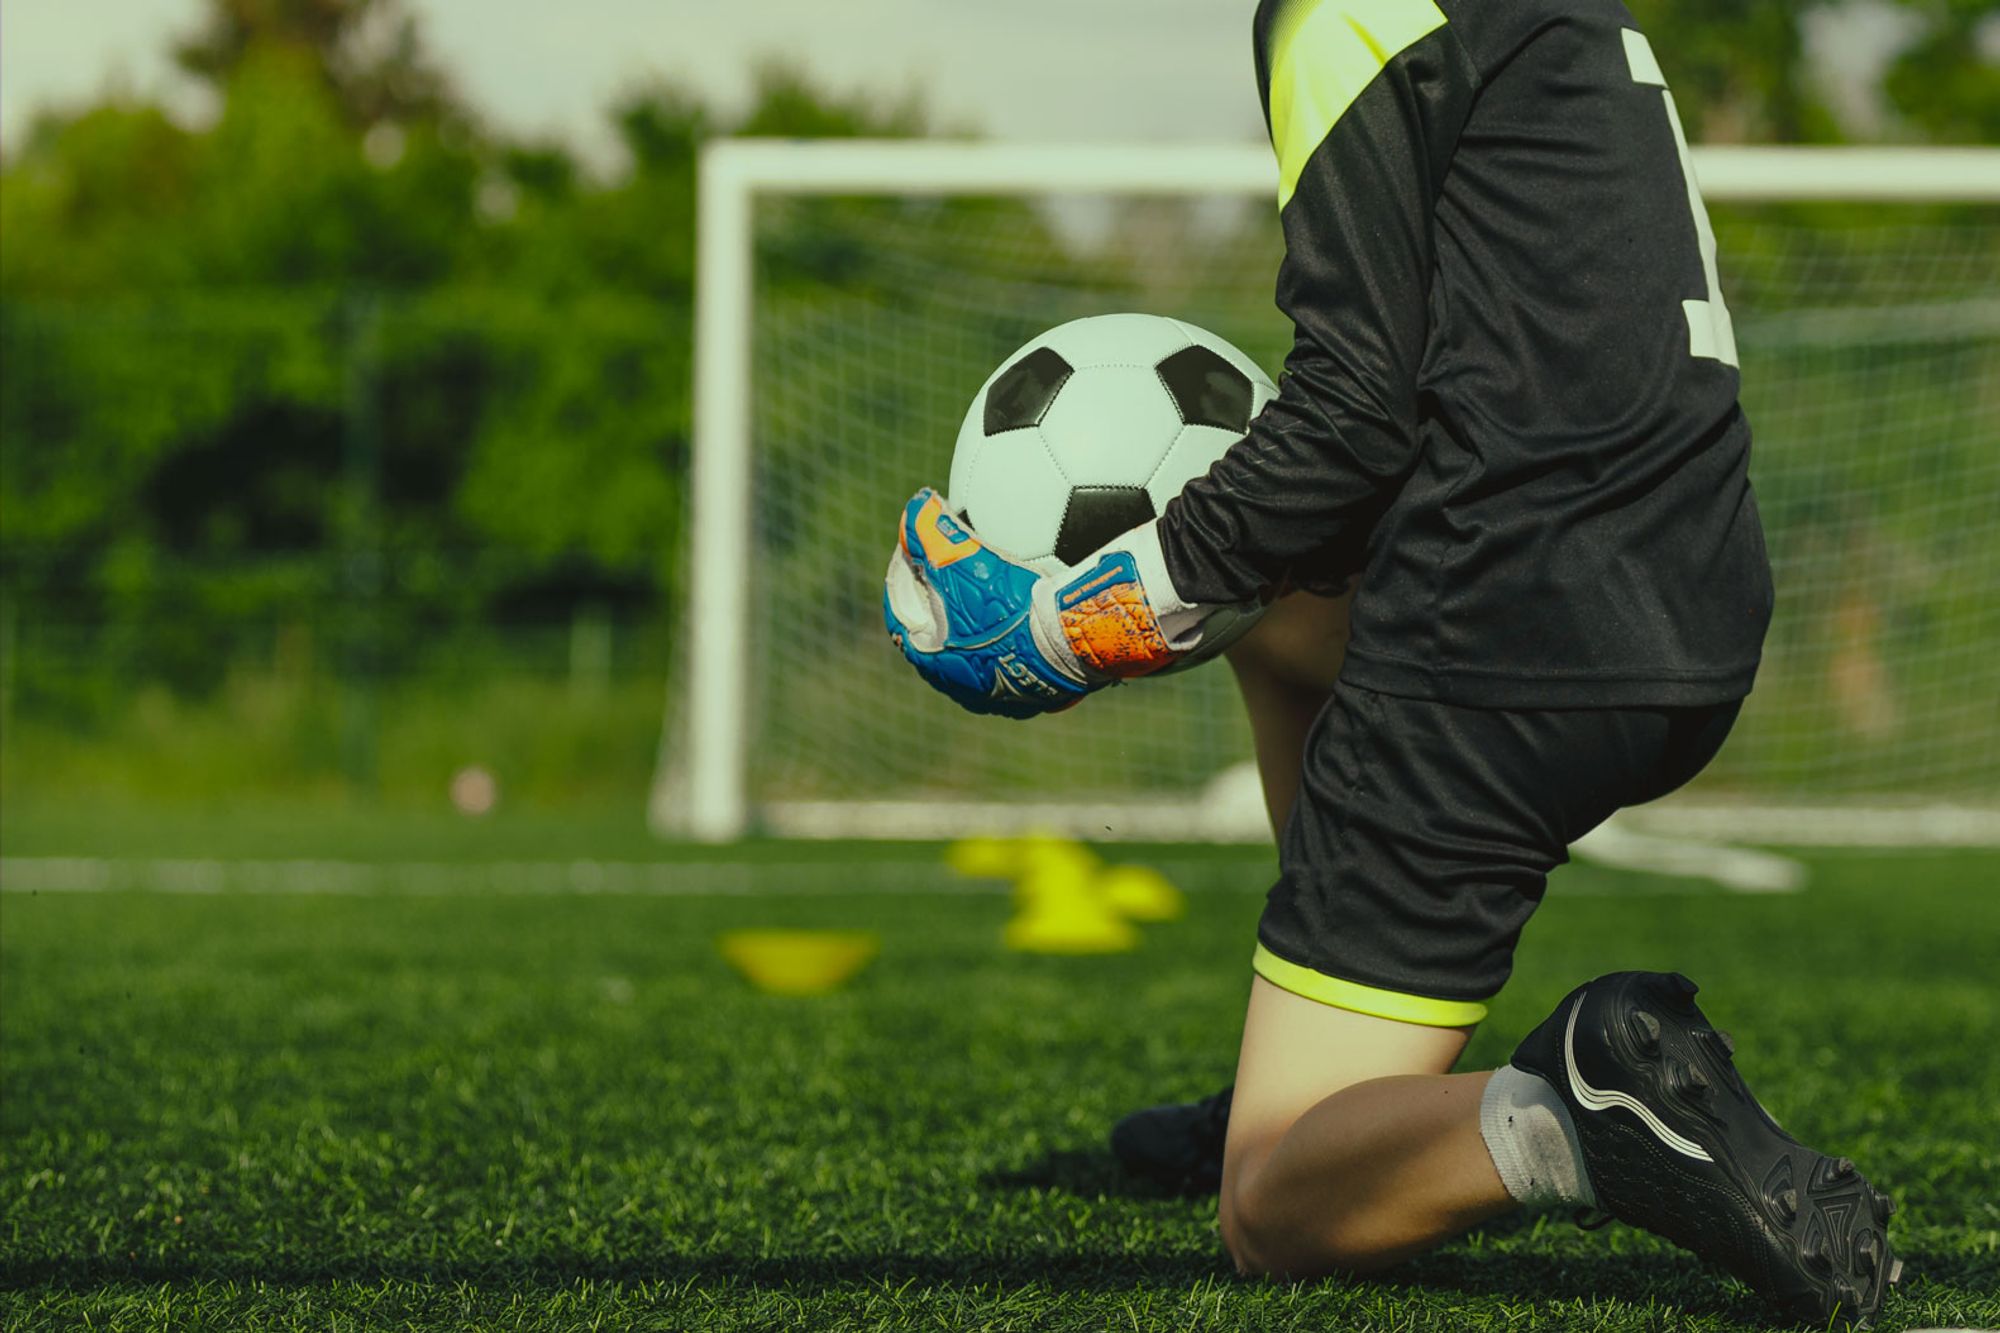 Optimising goalkeeping performance: The rise of pre-match analysis in football